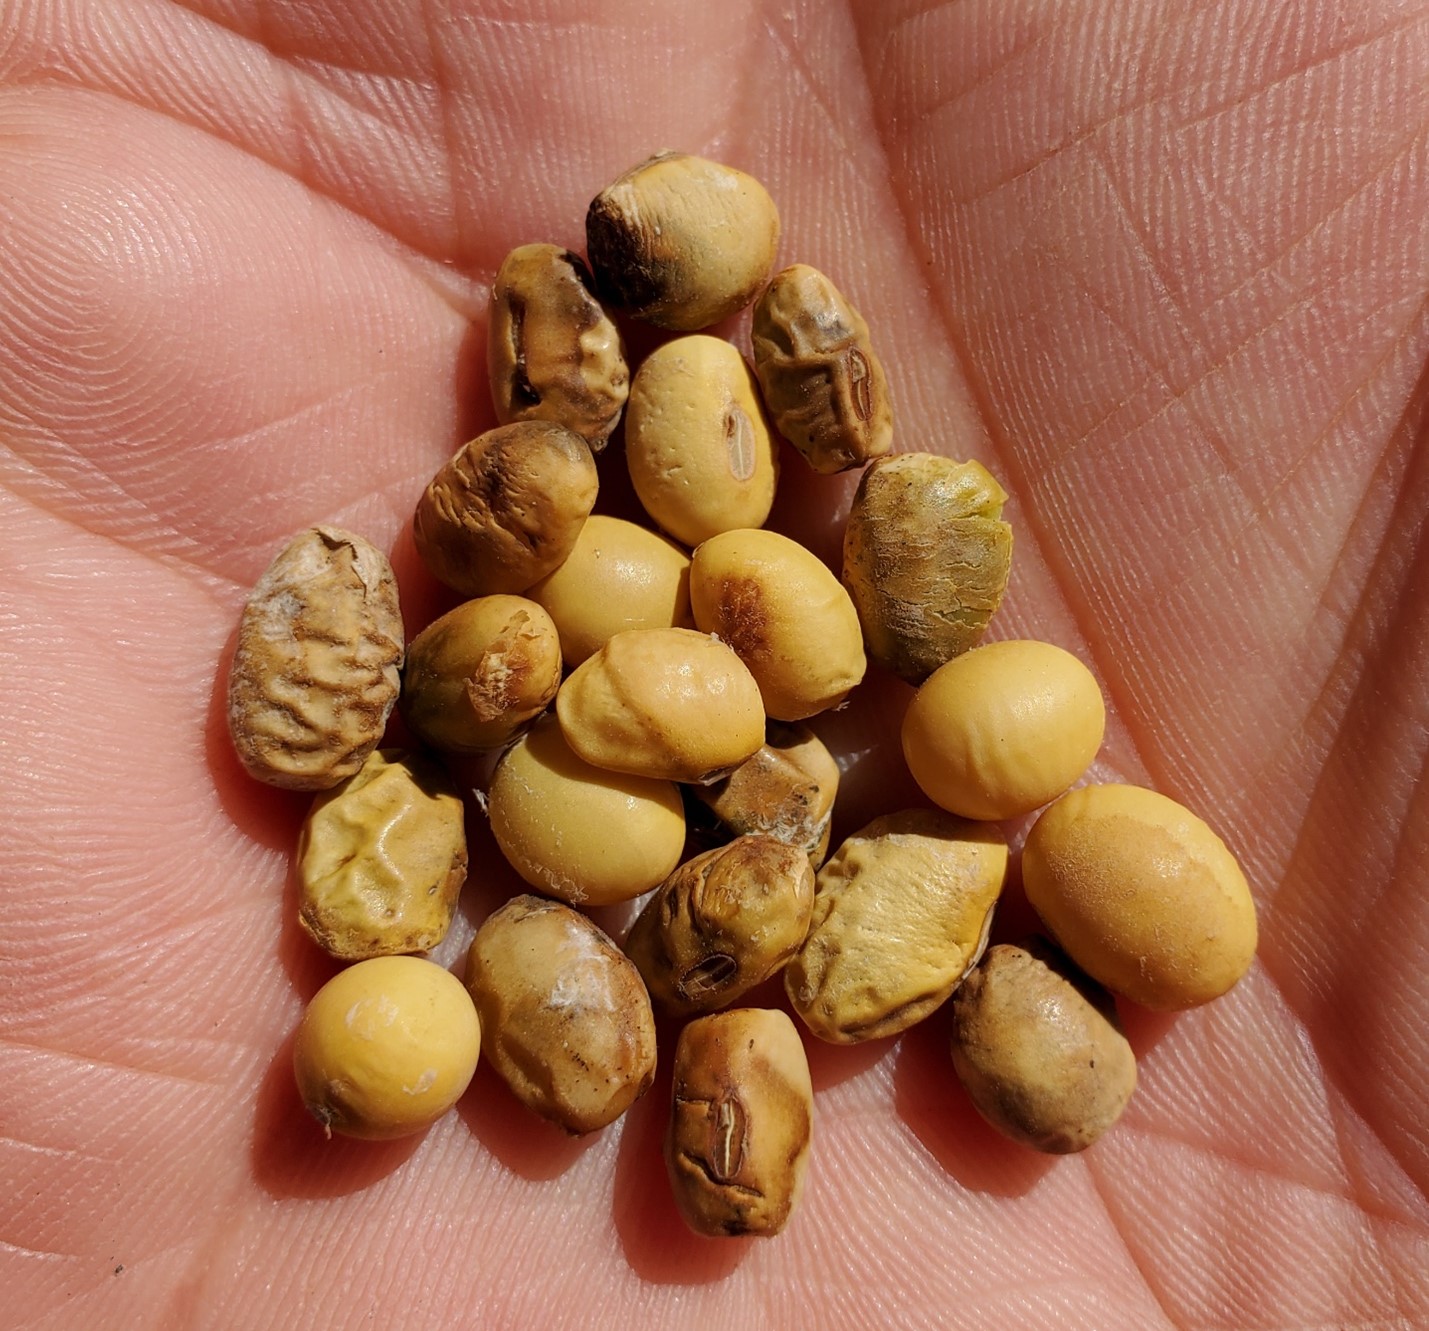 A handful of soybeans infected with Frogeye Leaf Spot with a withered, shriveled appearance.